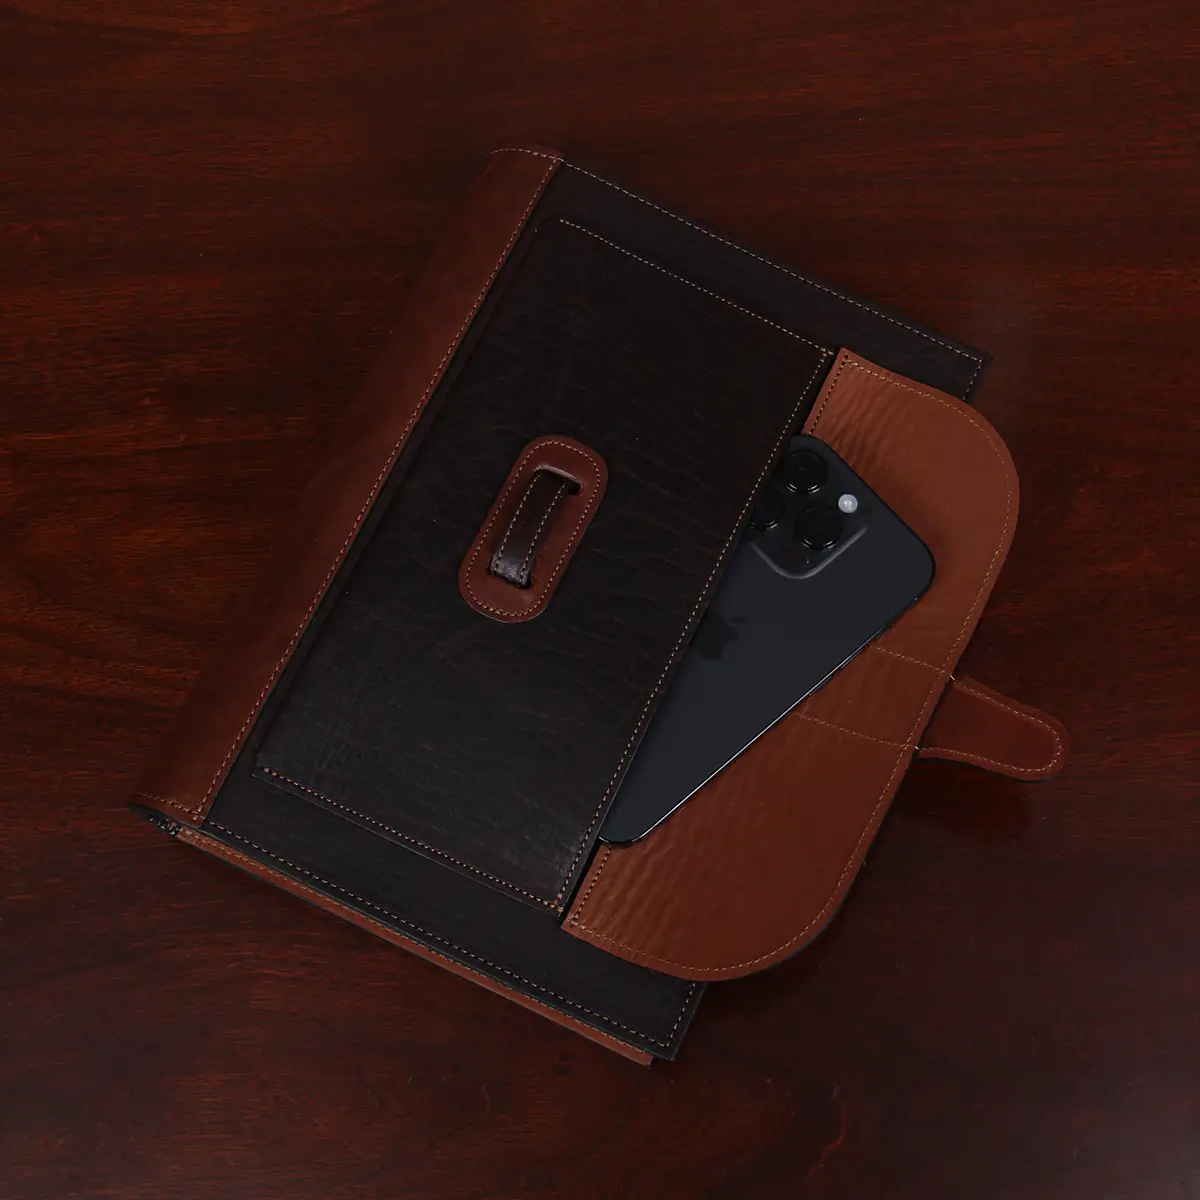 No. 1 Steno Padfolio in Tobacco Brown American Buffalo with Vintage Brown Steerhide Trim - front view showing the phone in the pocket